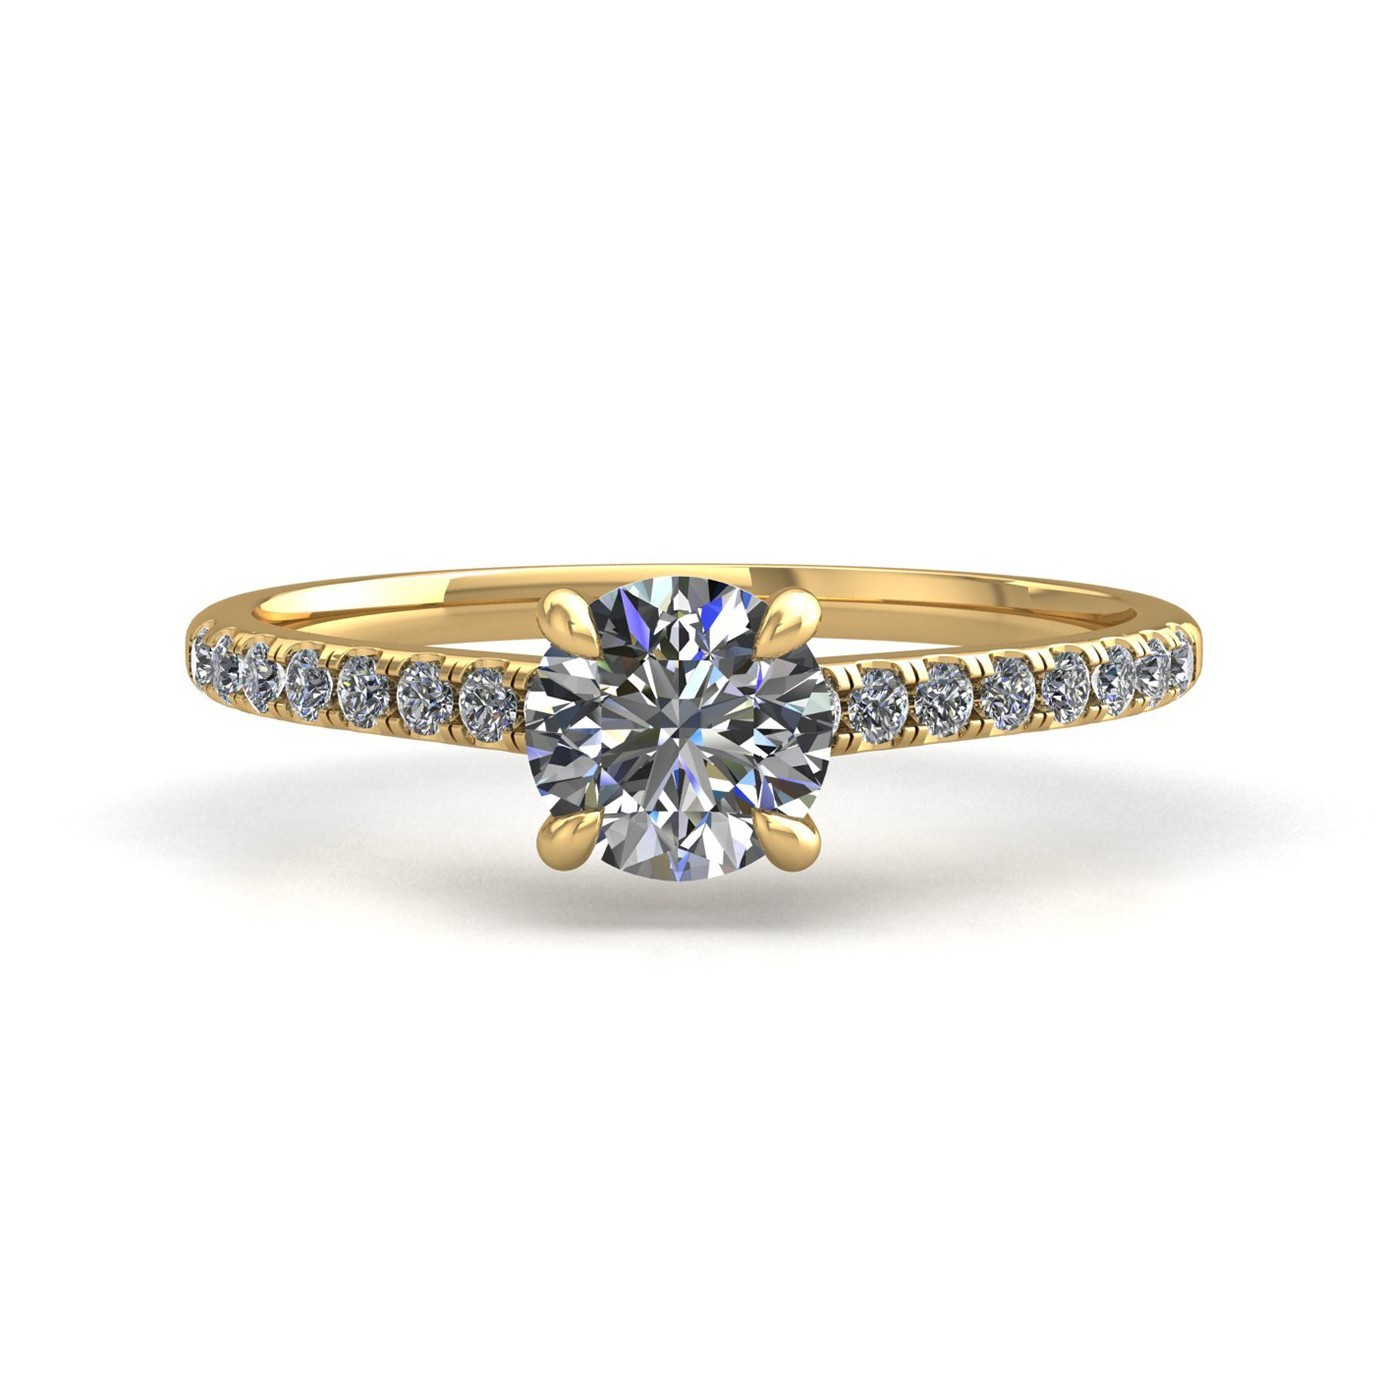 18k yellow gold 2.0ct 4 prongs round cut diamond engagement ring with whisper thin pavÉ set band Photos & images